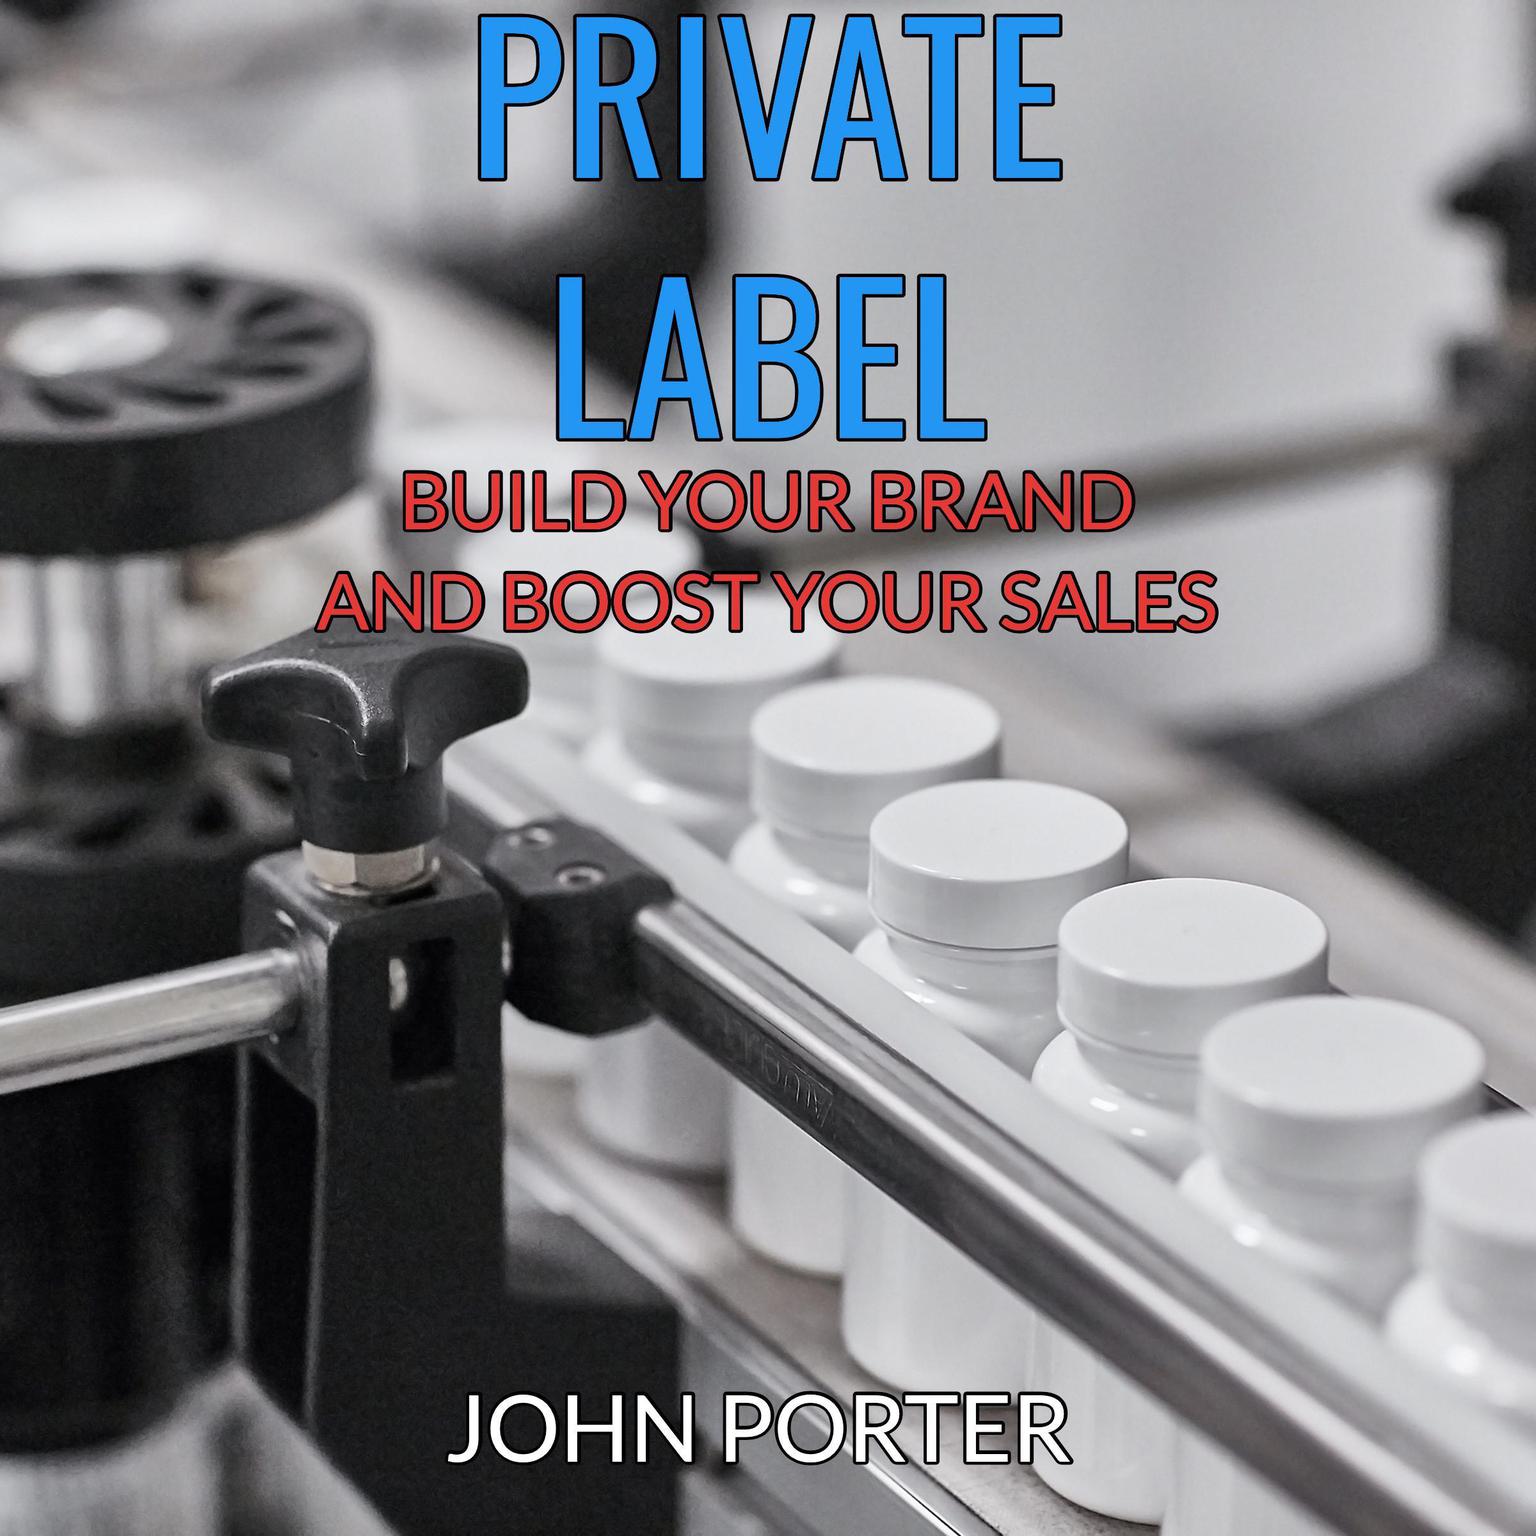 Private Label - Build your Brand and Boost your Sales - Audiobook, by John Porter